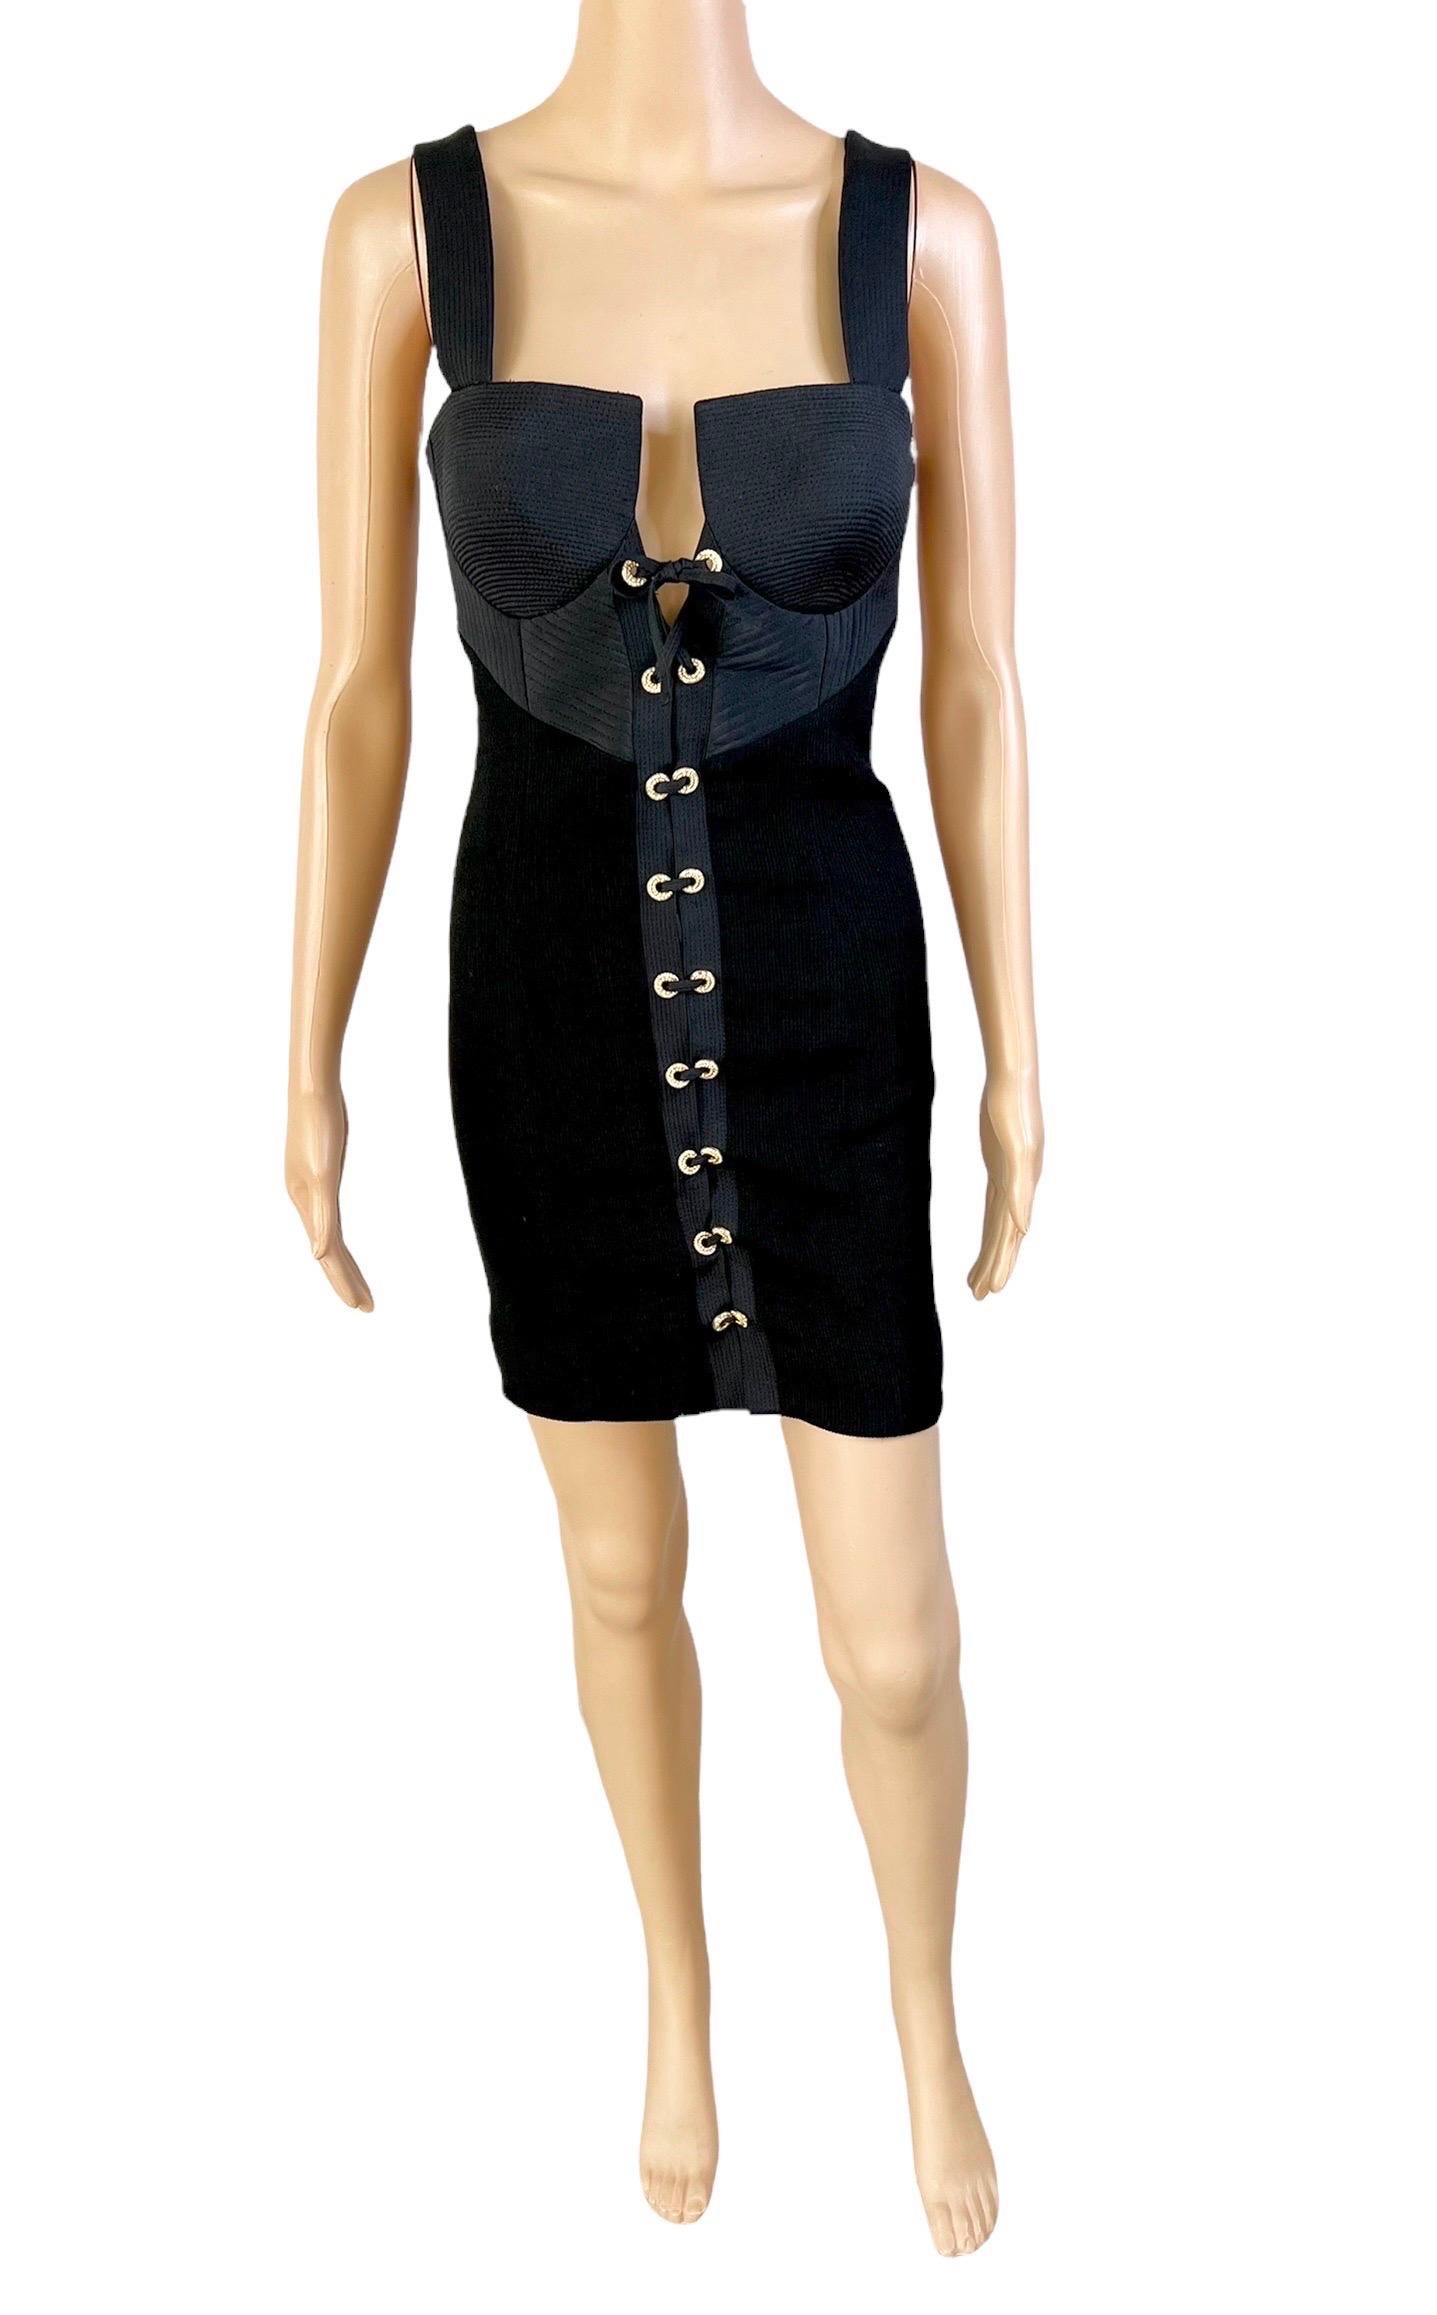 Gianni Versace S/S 1992 Couture Bustier Corset Lace Up Black Mini Dress In Good Condition For Sale In Naples, FL